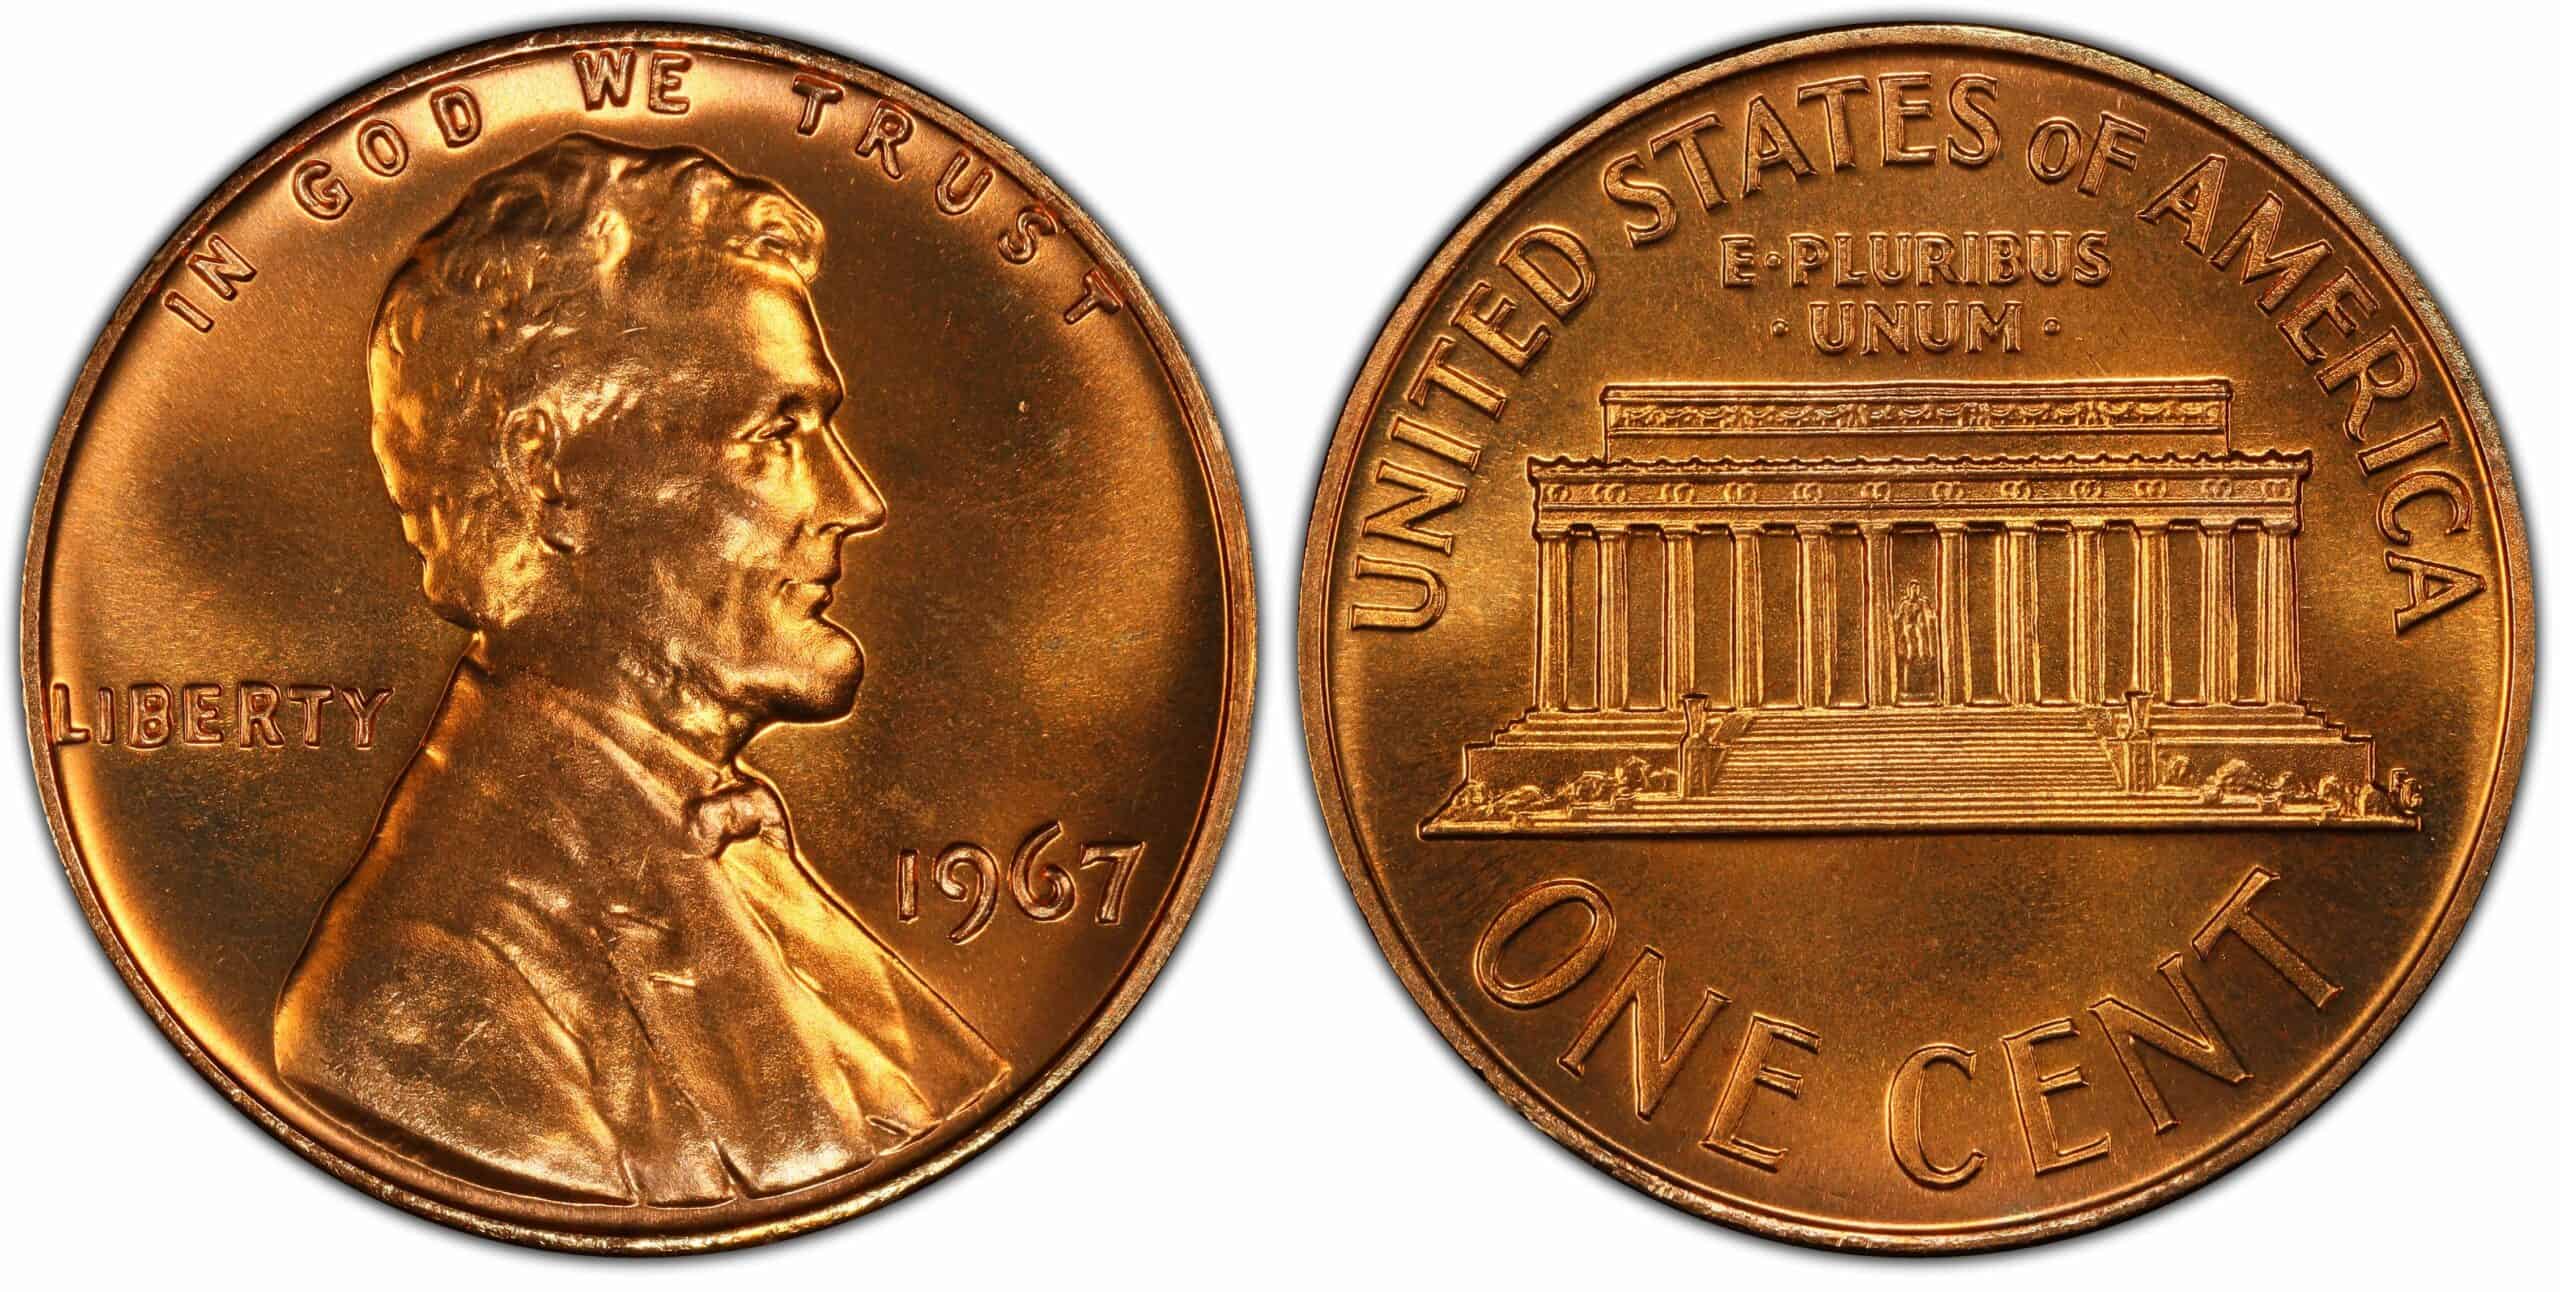 The 1967 SMS Penny Value